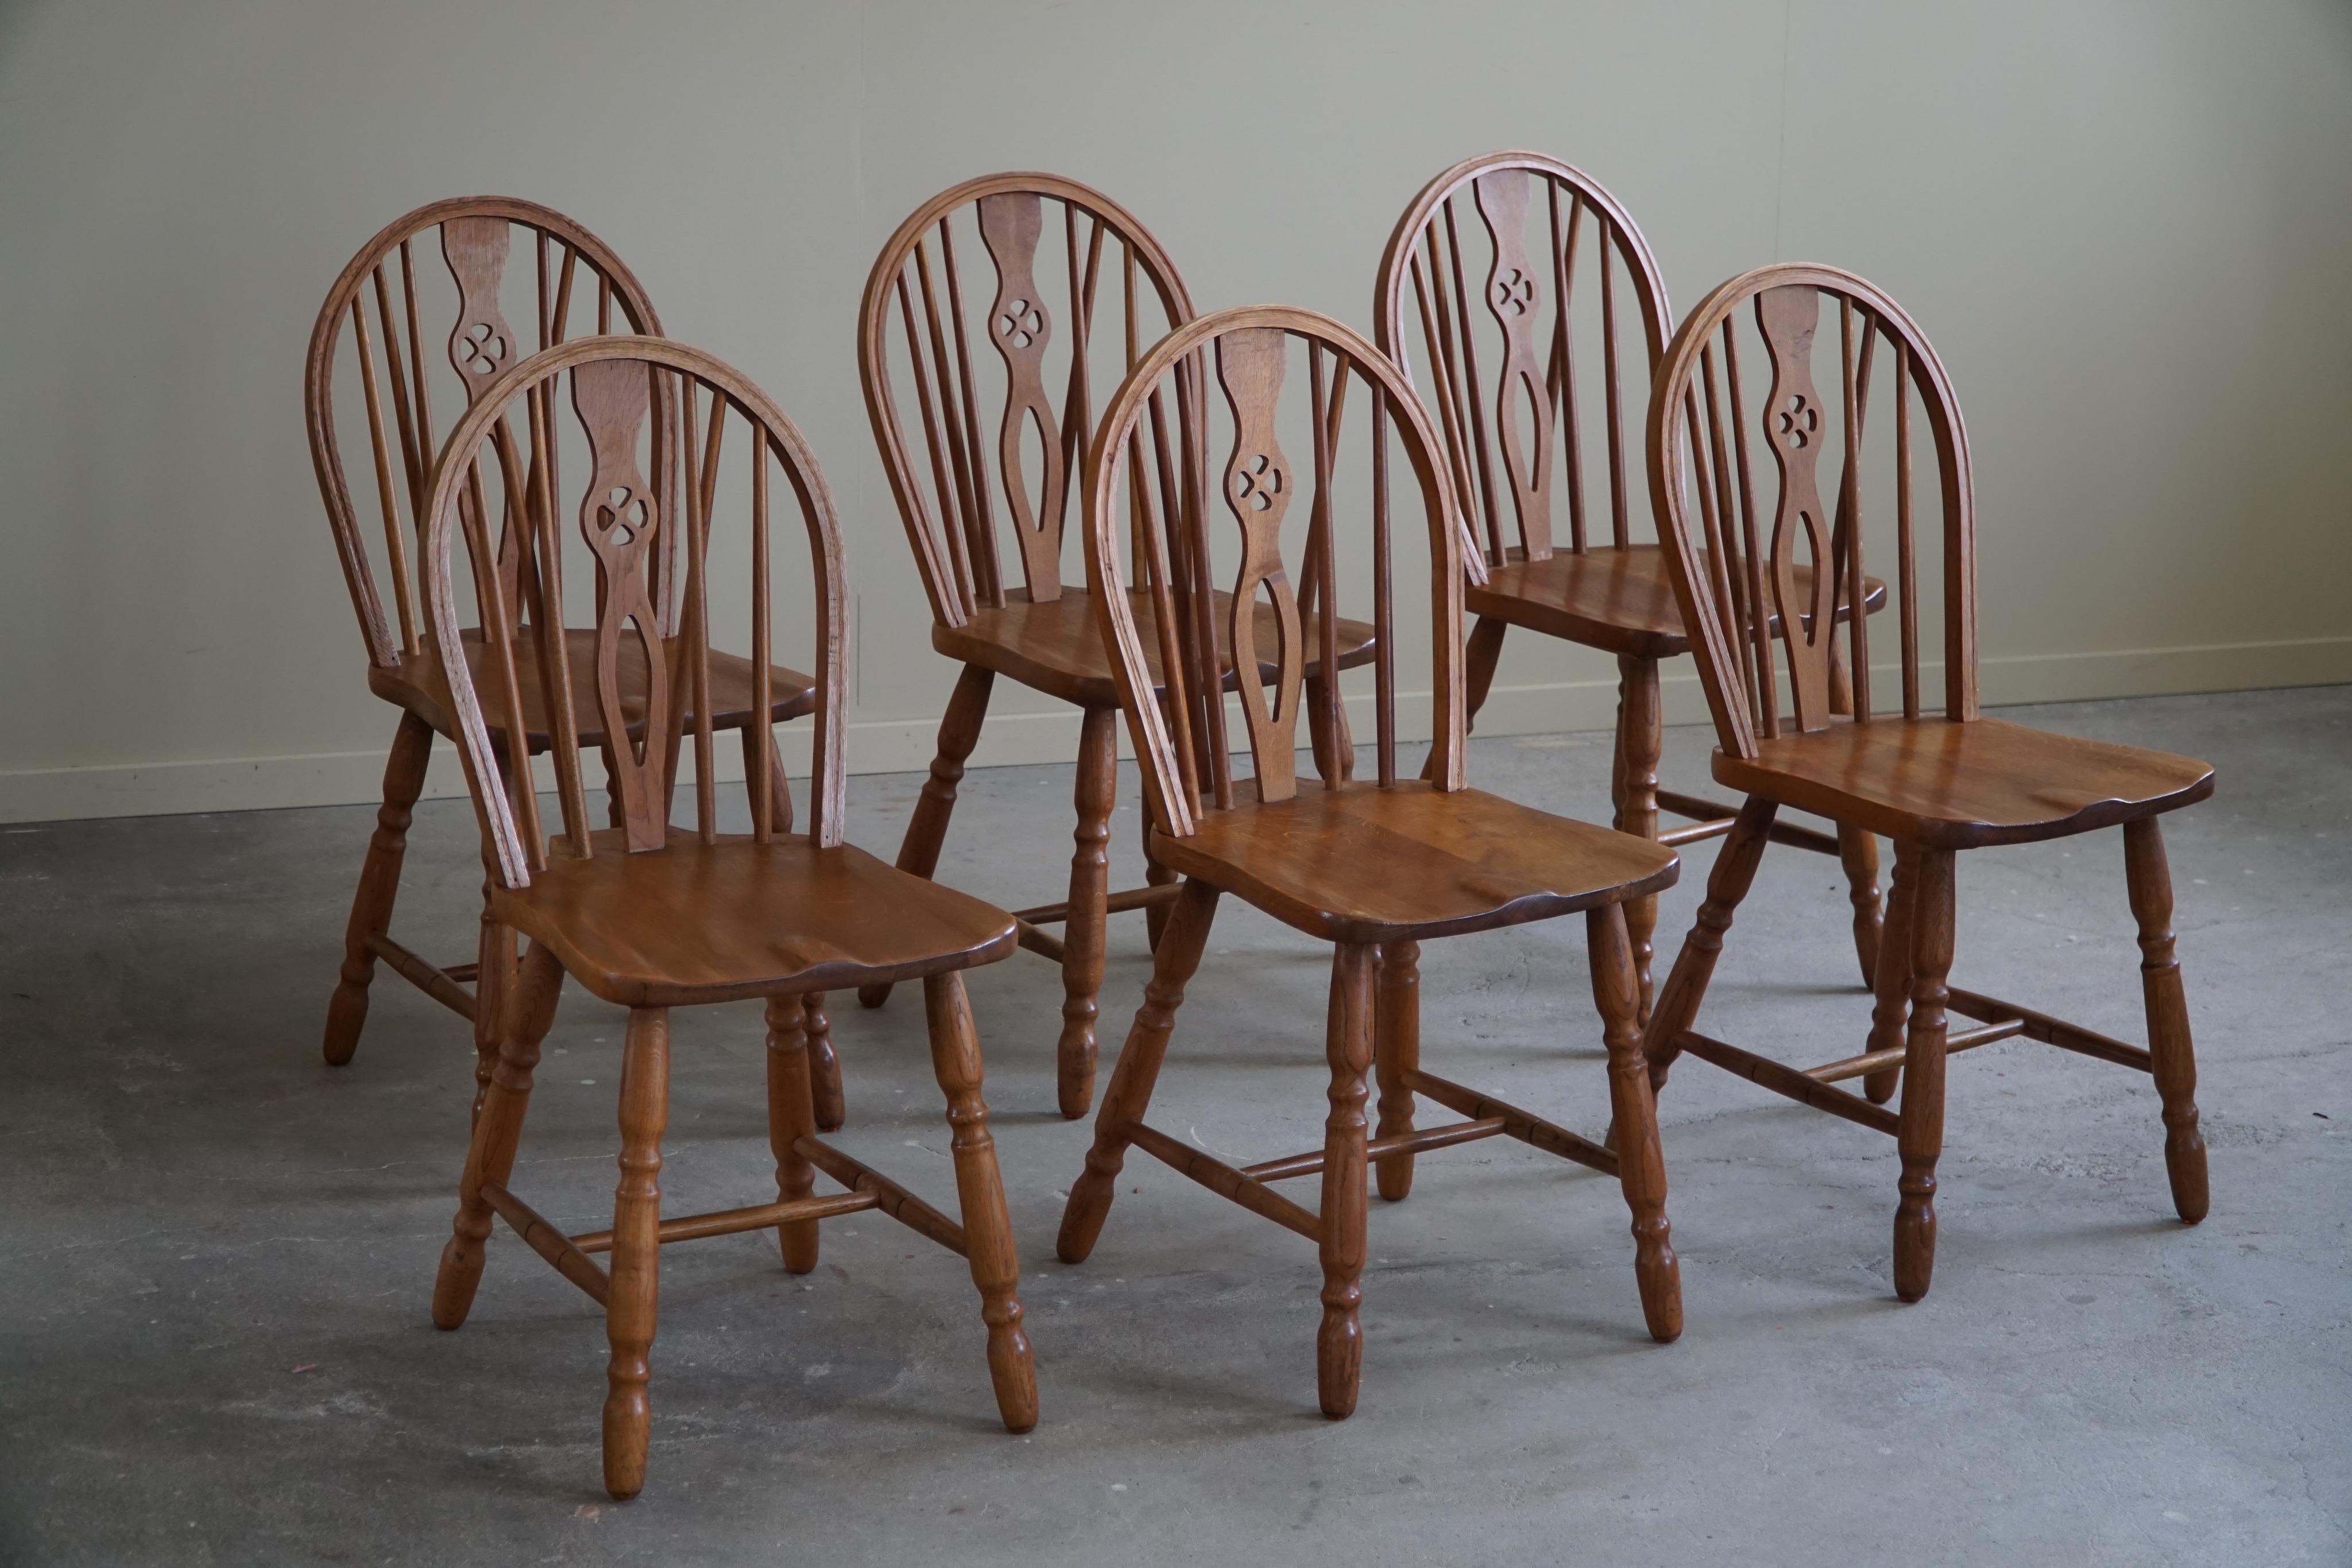 Set of 6 Windsor Dining Room Chairs in Oak, English Edwardian, 19th Century For Sale 14